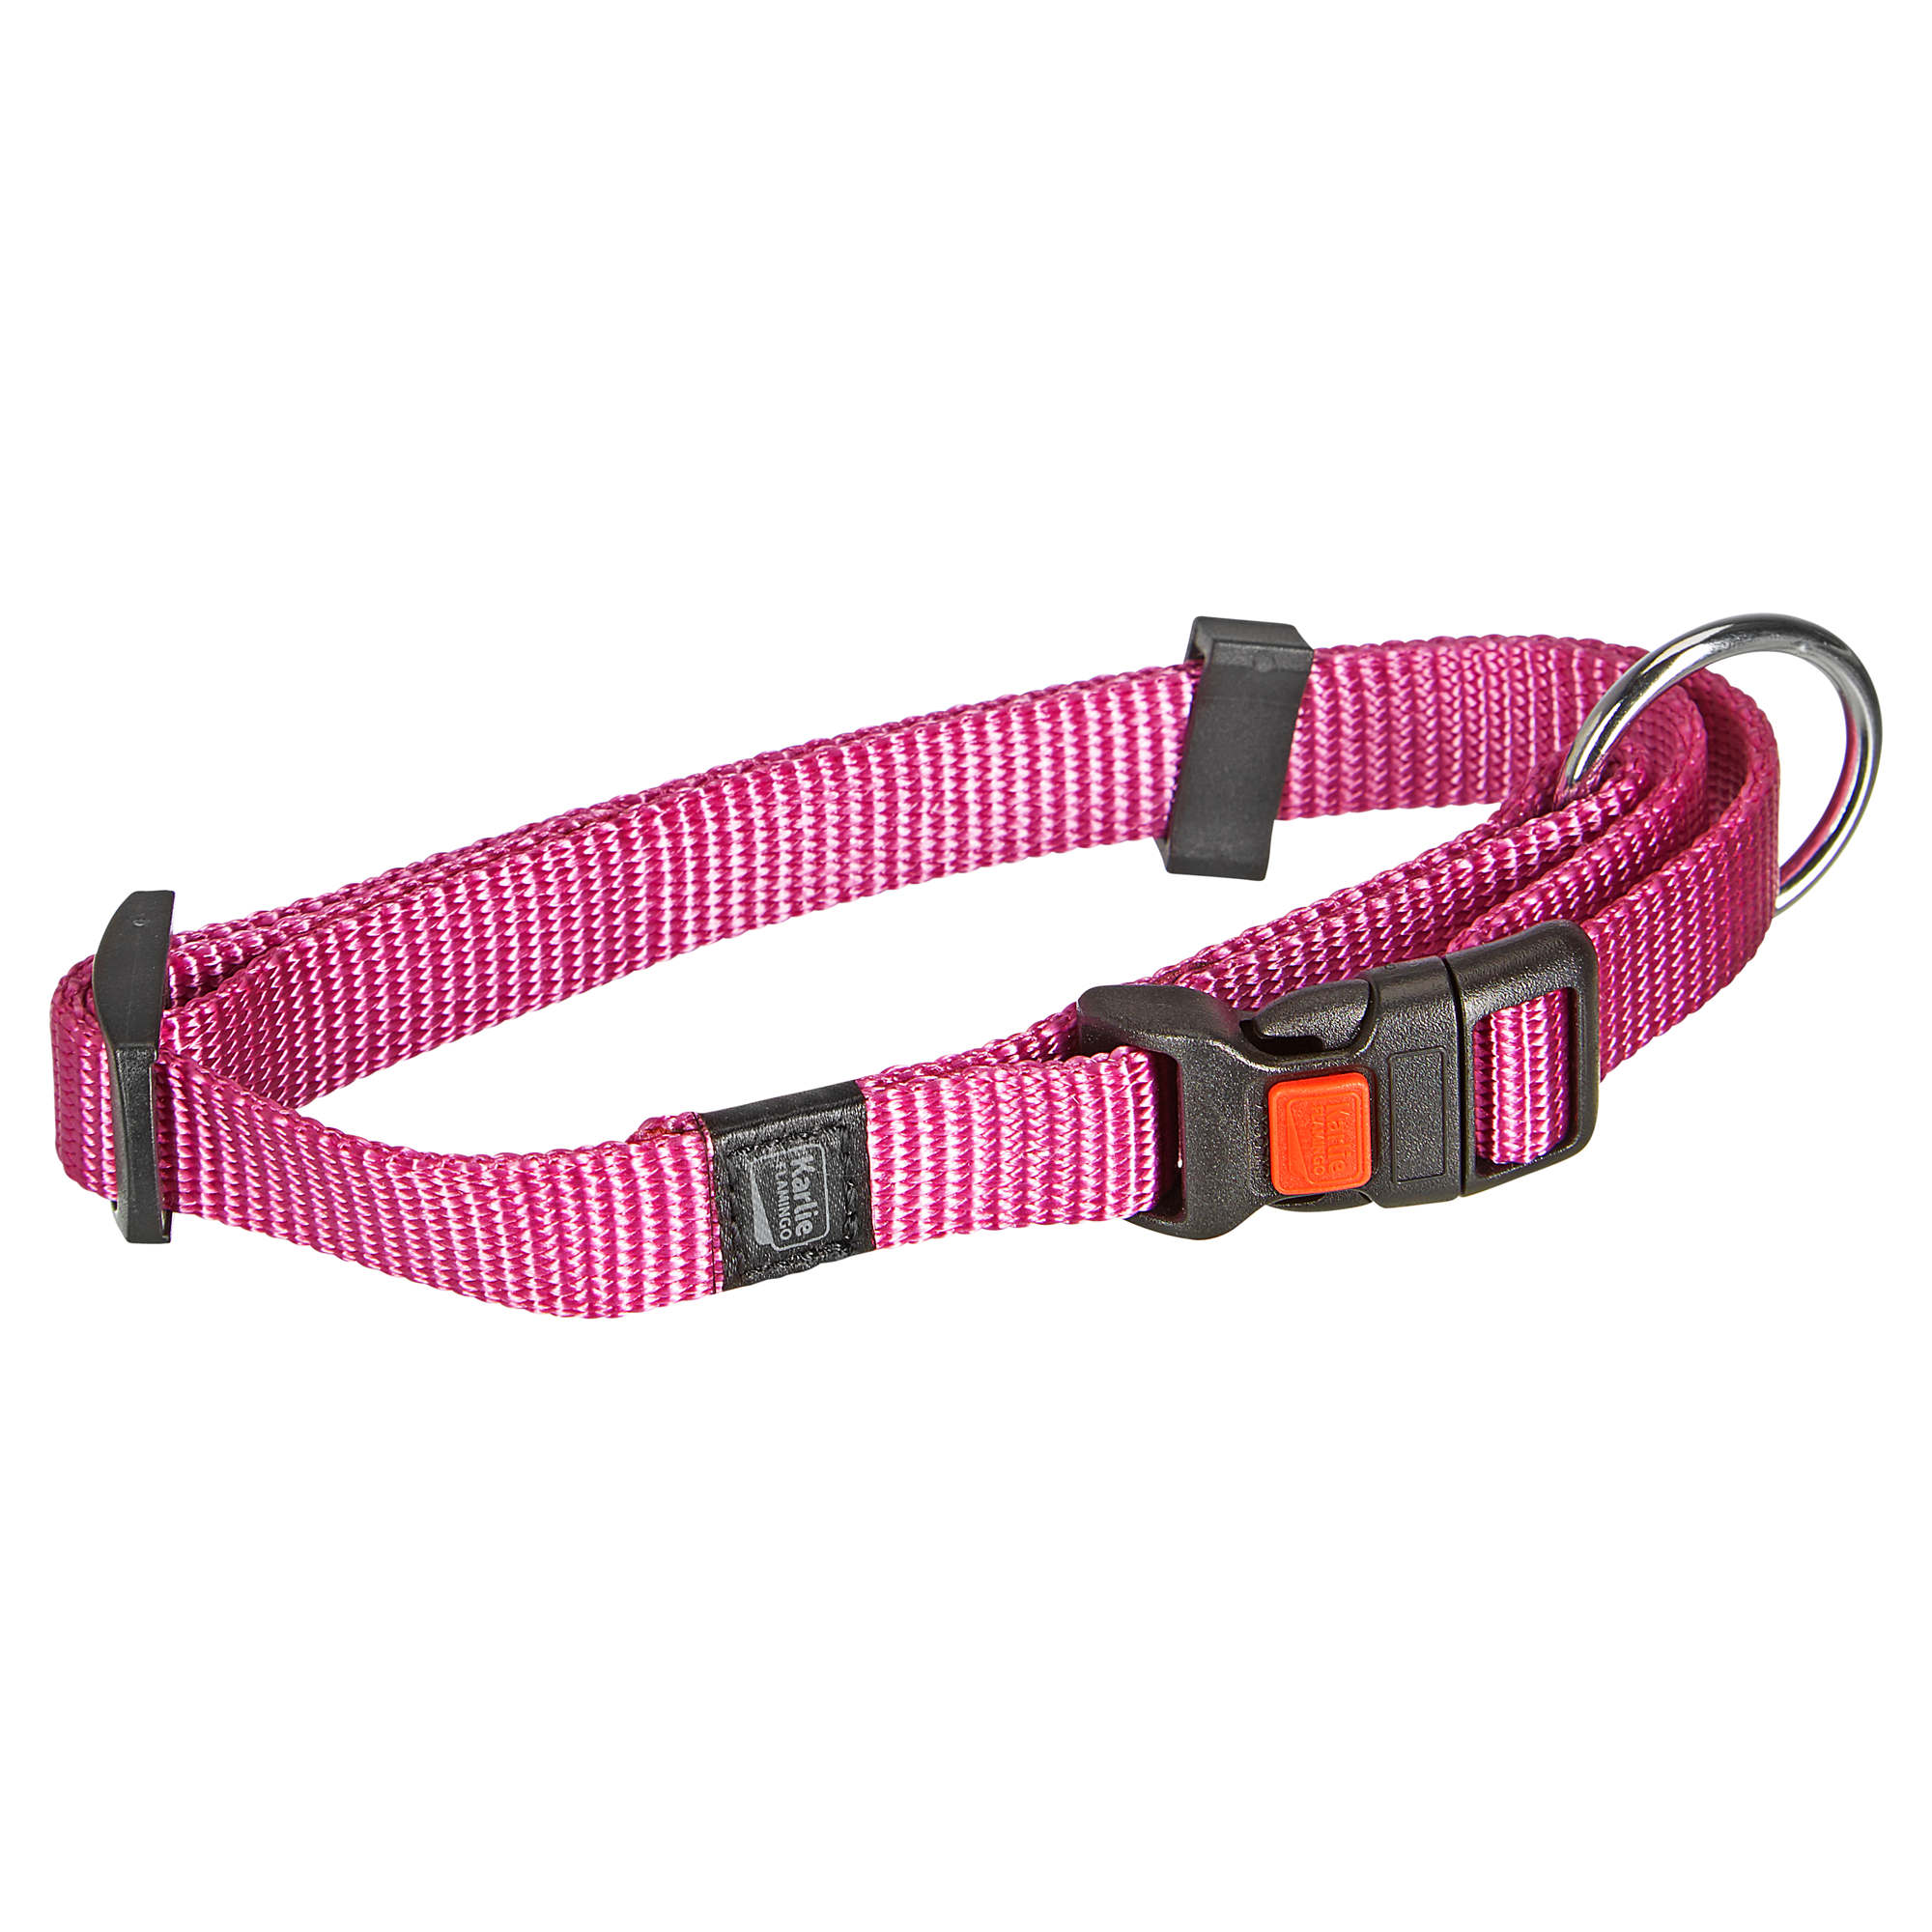 Hundehalsband "Art Sportiv Plus" rosa Gr. S + product picture